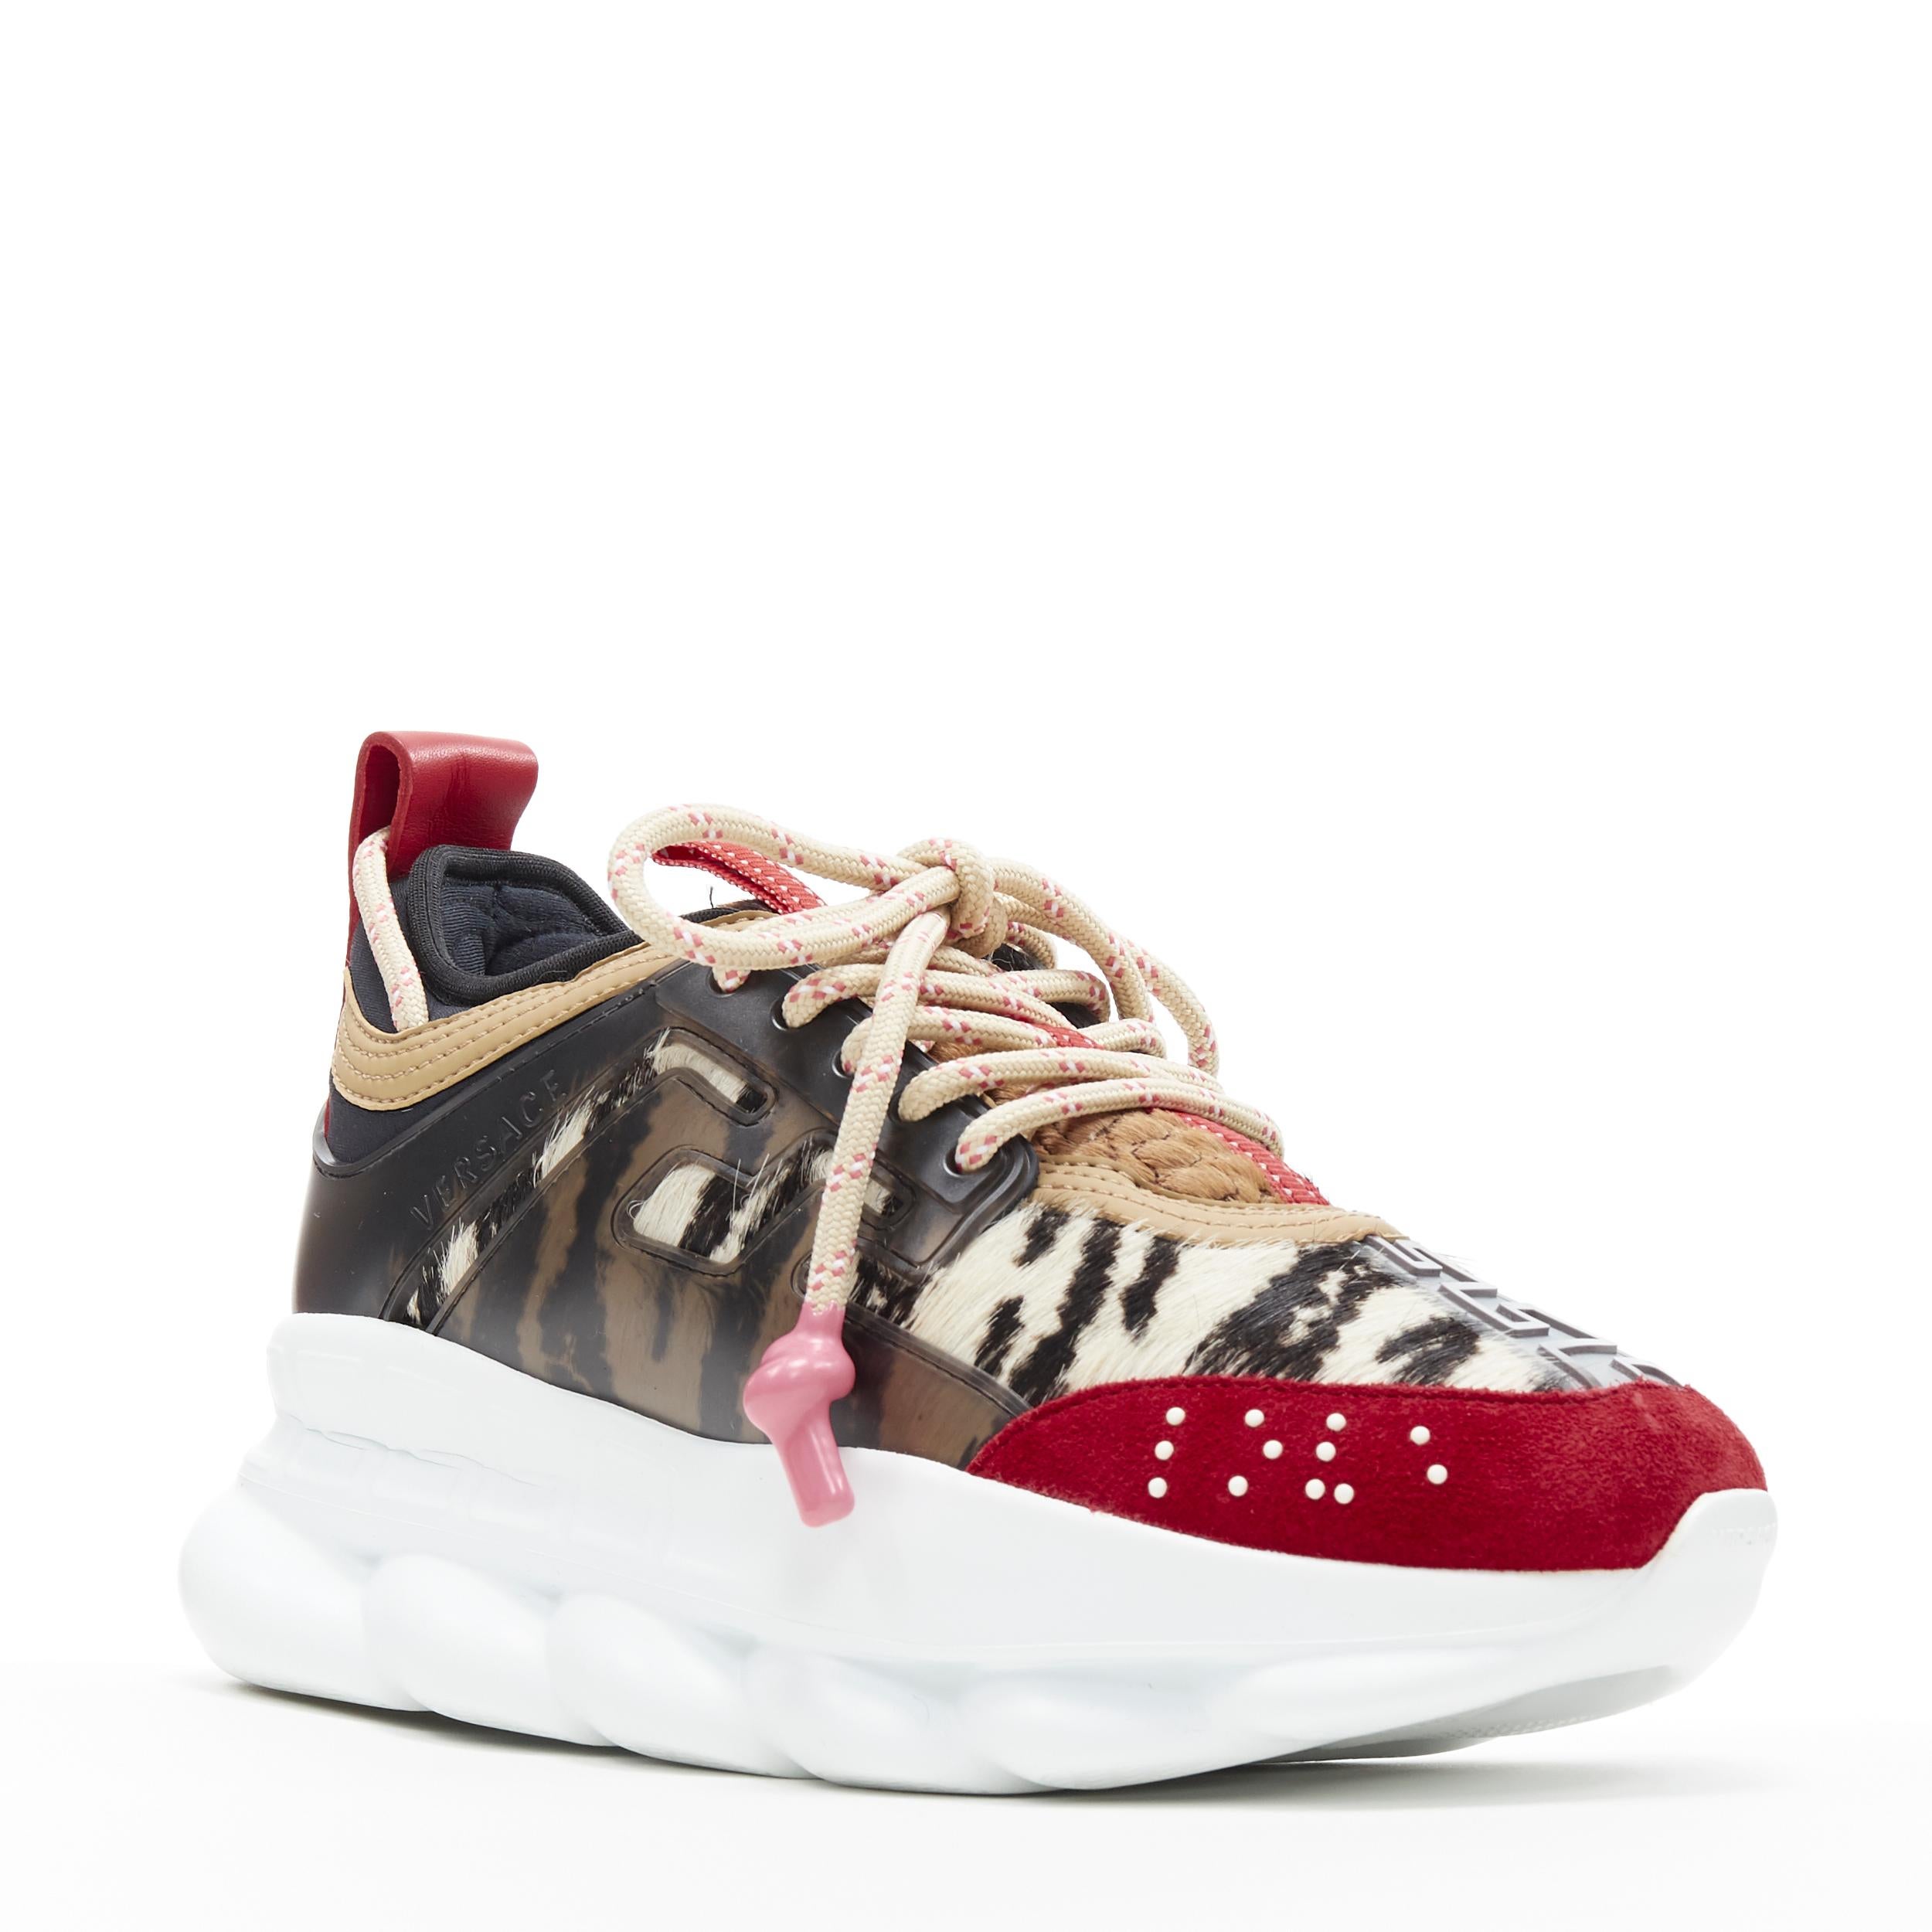 new VERSACE Chain Reaction Wild Red Animal calf hair low dad sneaker EU38 US8 Reference: TGAS/B00194 
Brand: Versace 
Designer: Salehe Bembury 
Model: Chain Reaction Wild Leopard 
Material: Leather 
Color: Red 
Pattern: Zebra 
Closure: Lace up